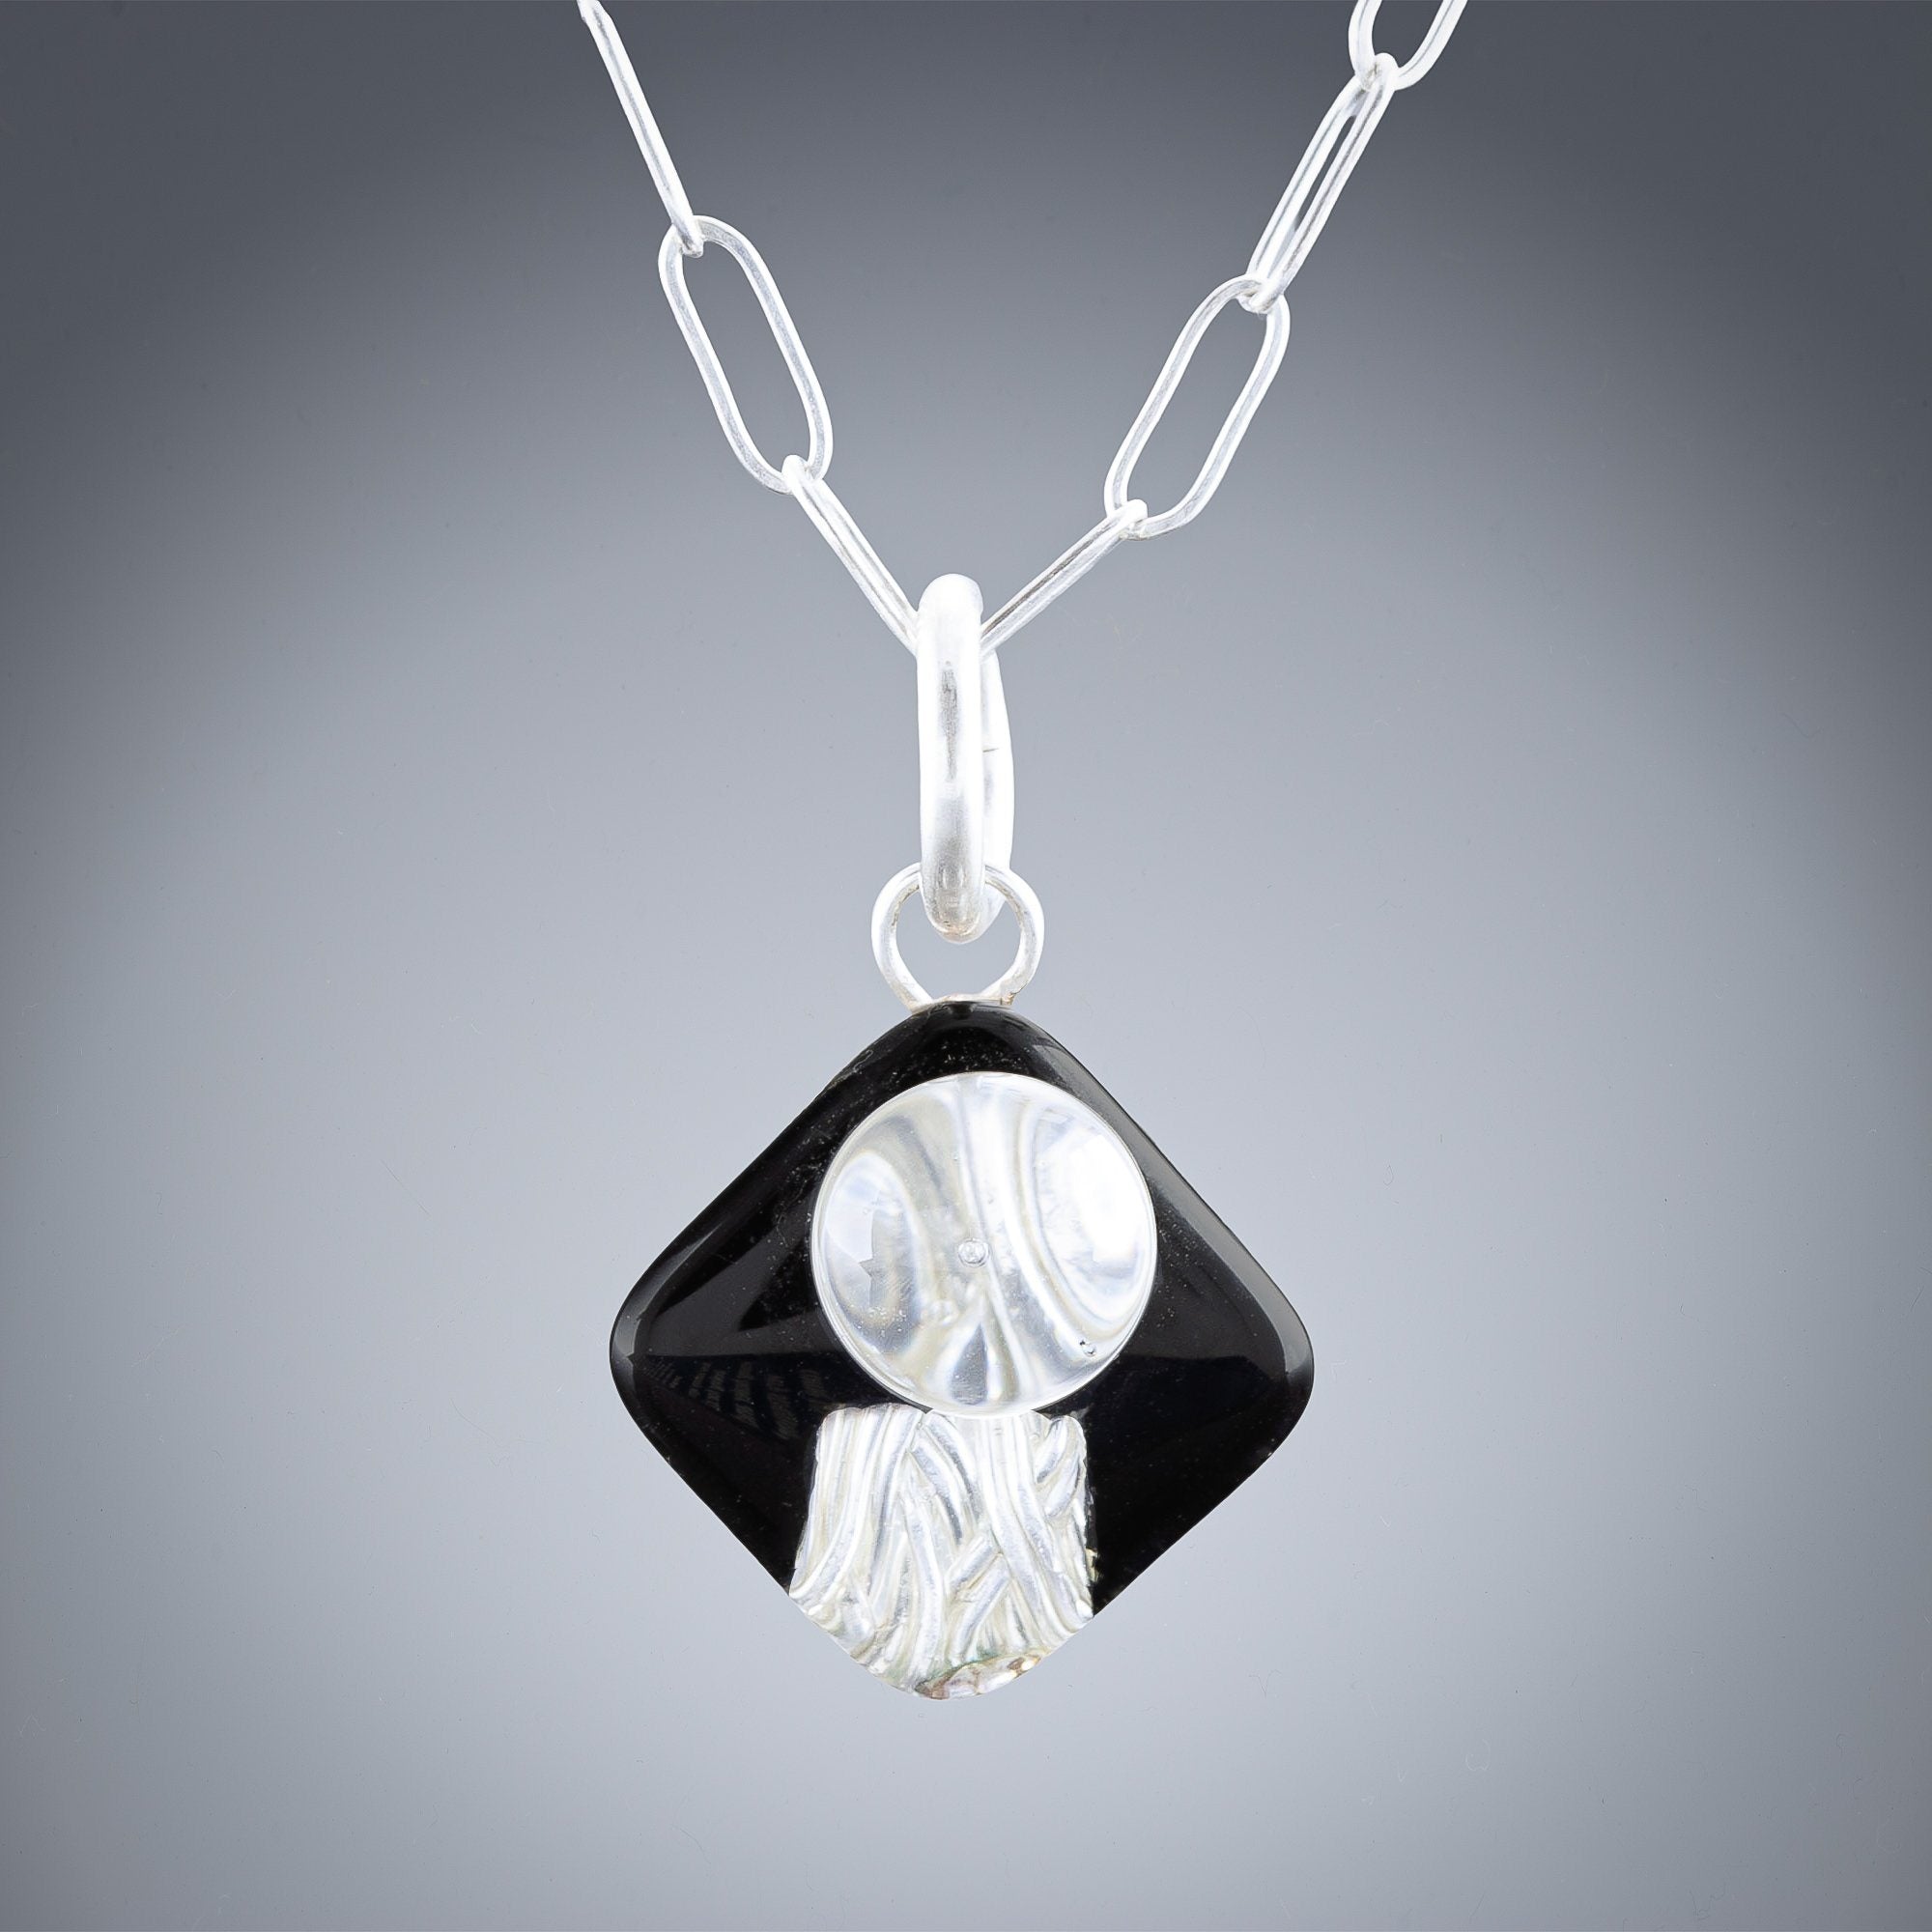 Small Black and Silver Art Deco Inspired Pendant Necklace in Sterling Silver